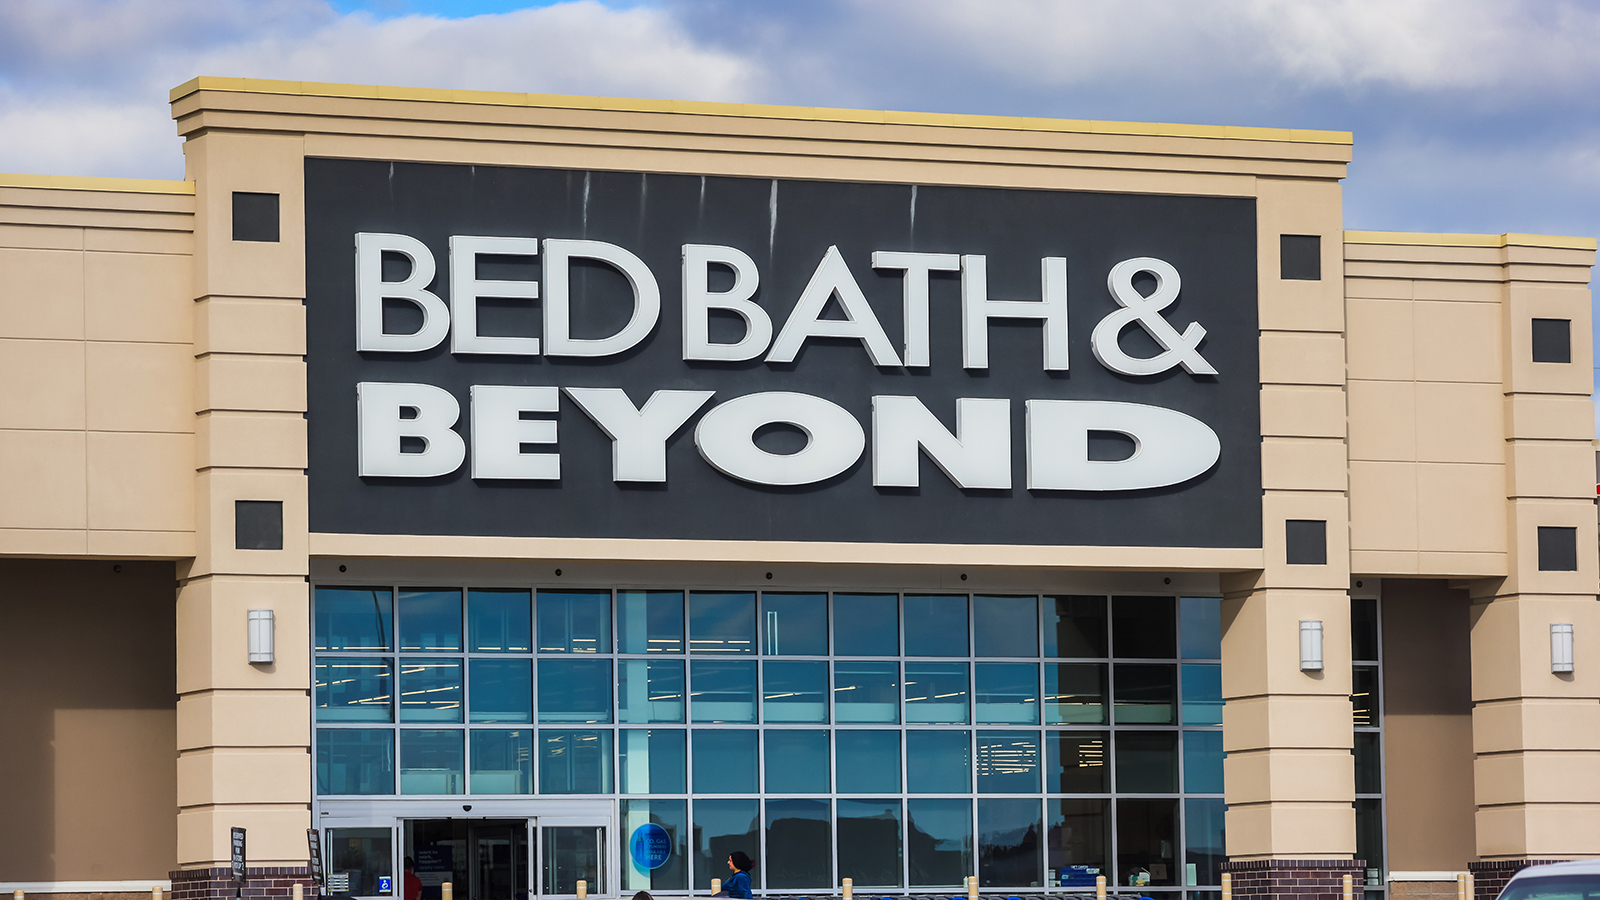 HALIFAX, NOVA SCOTIA, CANADA - JUNE 2022 - BED BATH BEYOND Storefront. An American chain of domestic merchandise retail stores for Bedding, Baths, Cookware, Fine China, Wedding, Gifts